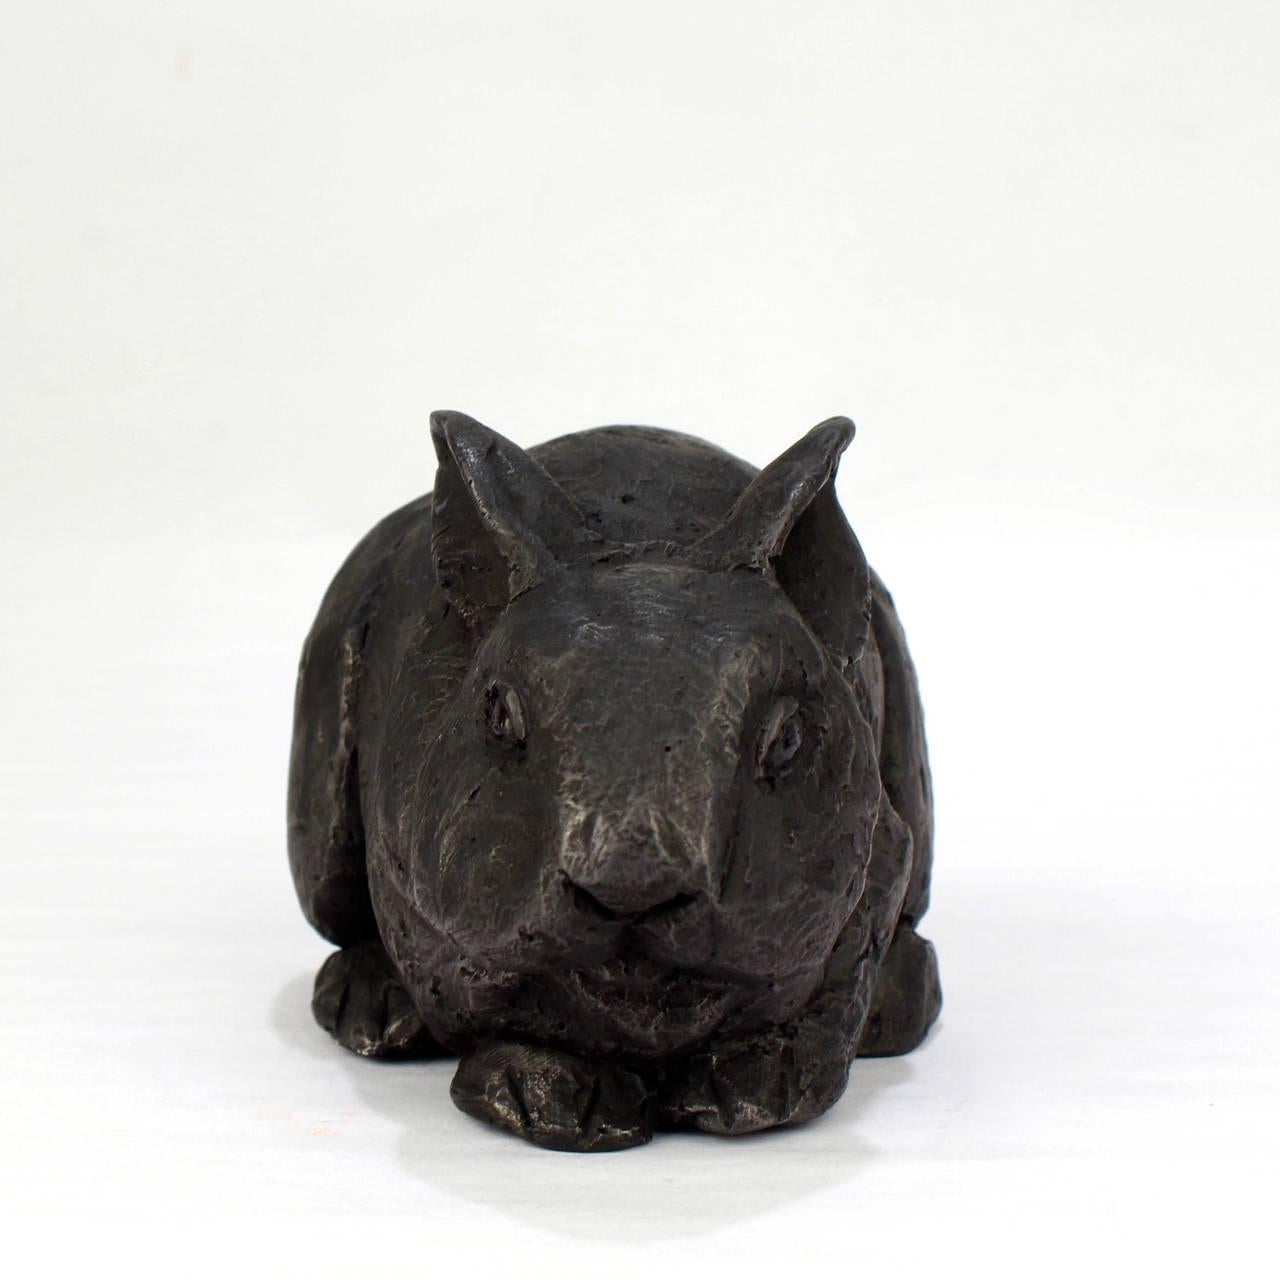 Black Gesso and Raw Graphite Resin Sculpture of a Pygmy Rabbit by Darla Jackson In Good Condition For Sale In Philadelphia, PA